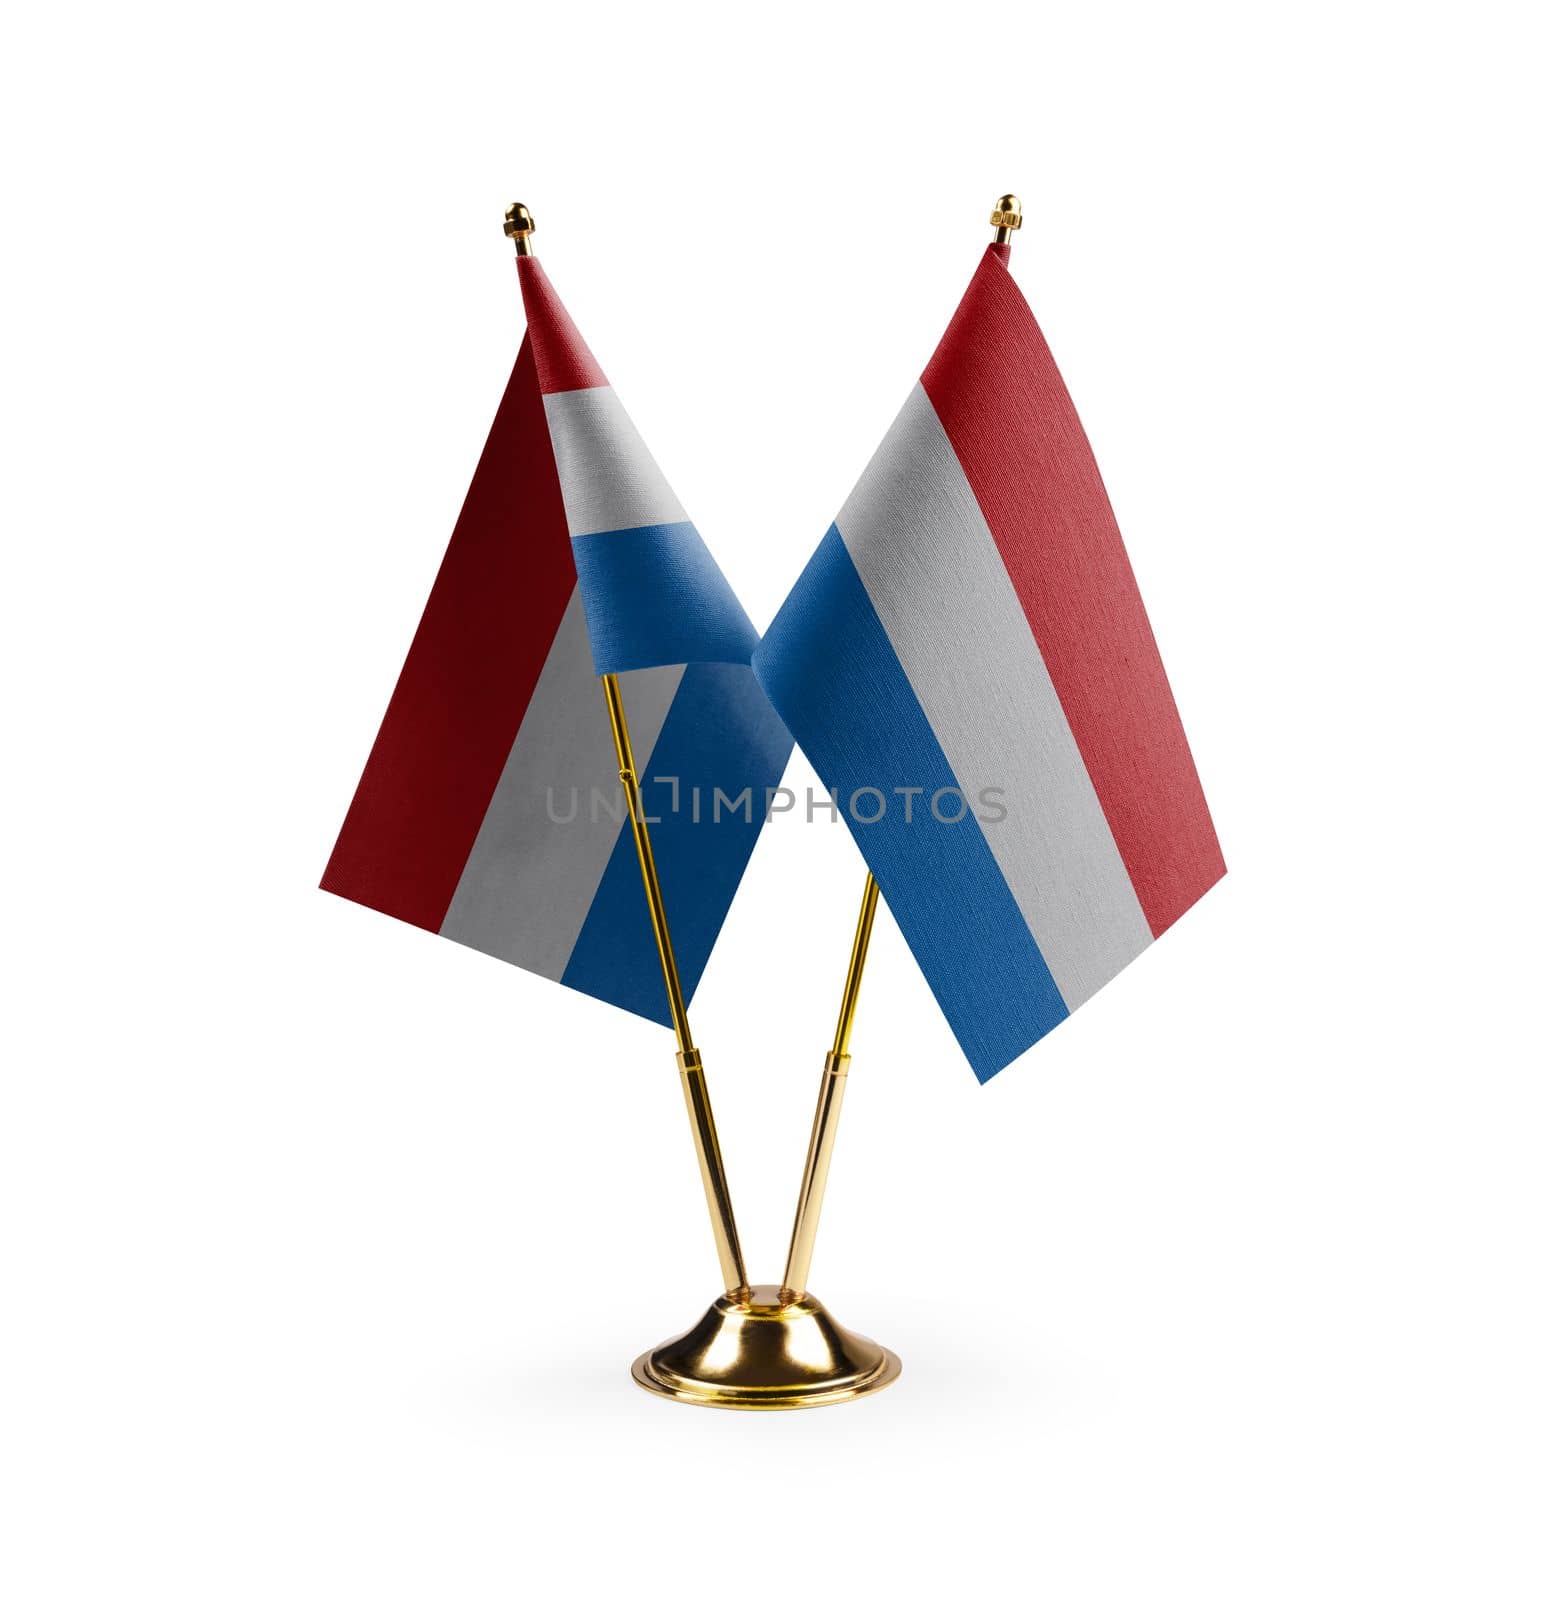 Small national flags of the Netherlands on a white background.